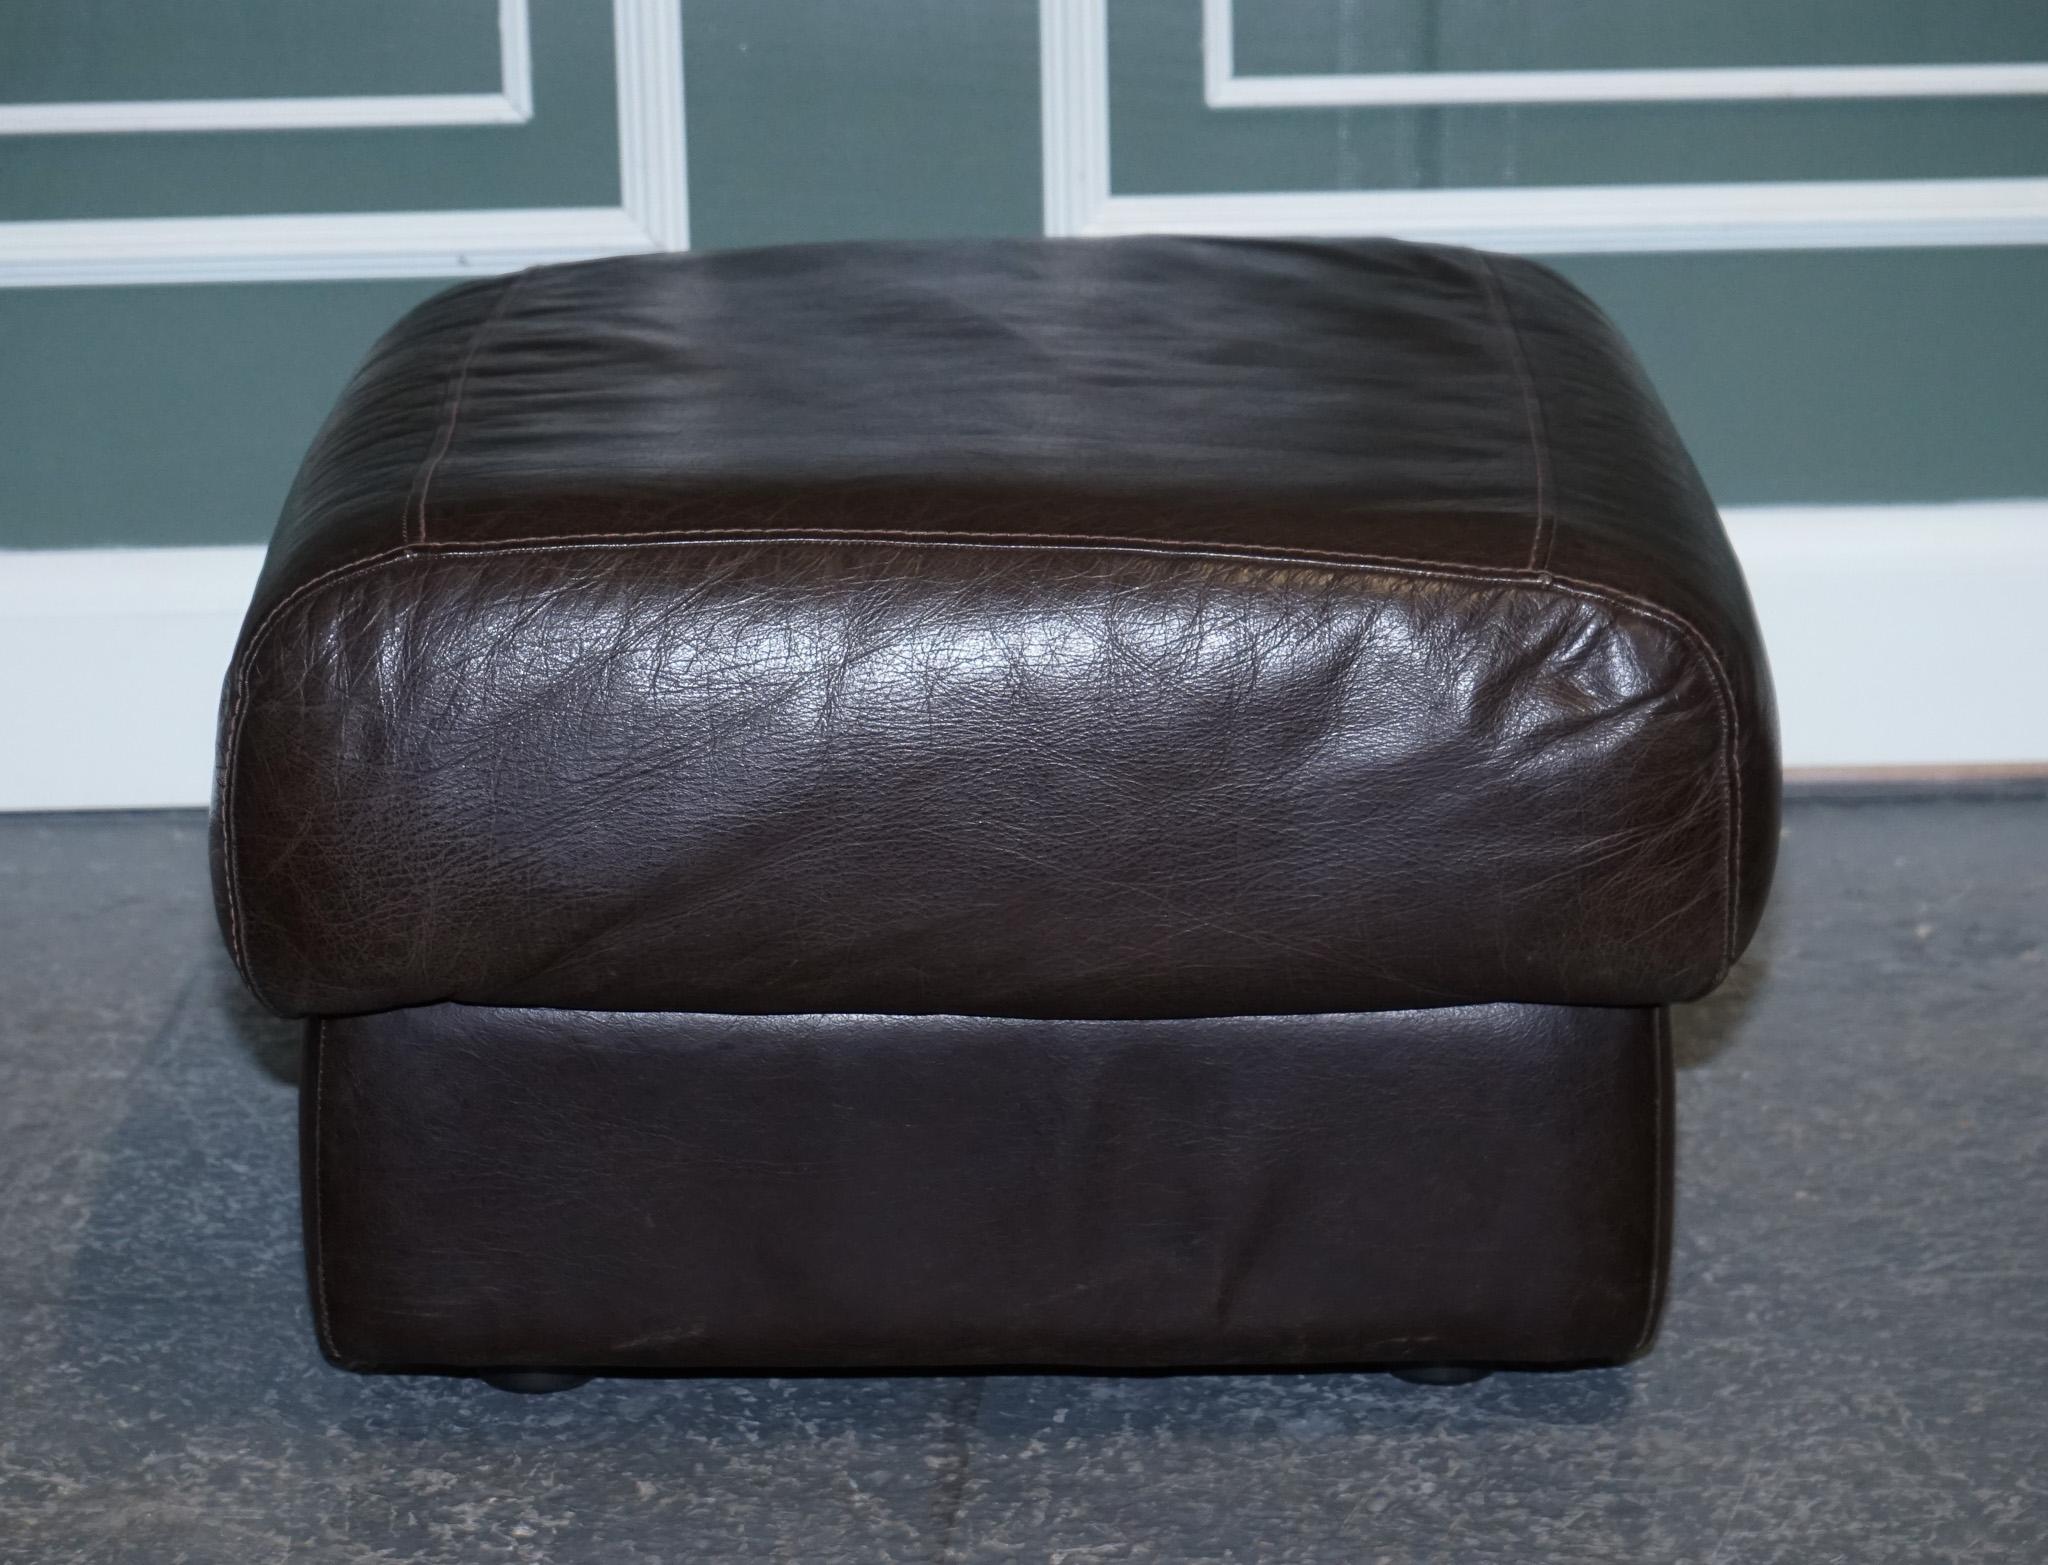 Hand-Crafted Vintage Chocolate Brown Leather Footstool, '1/2' For Sale